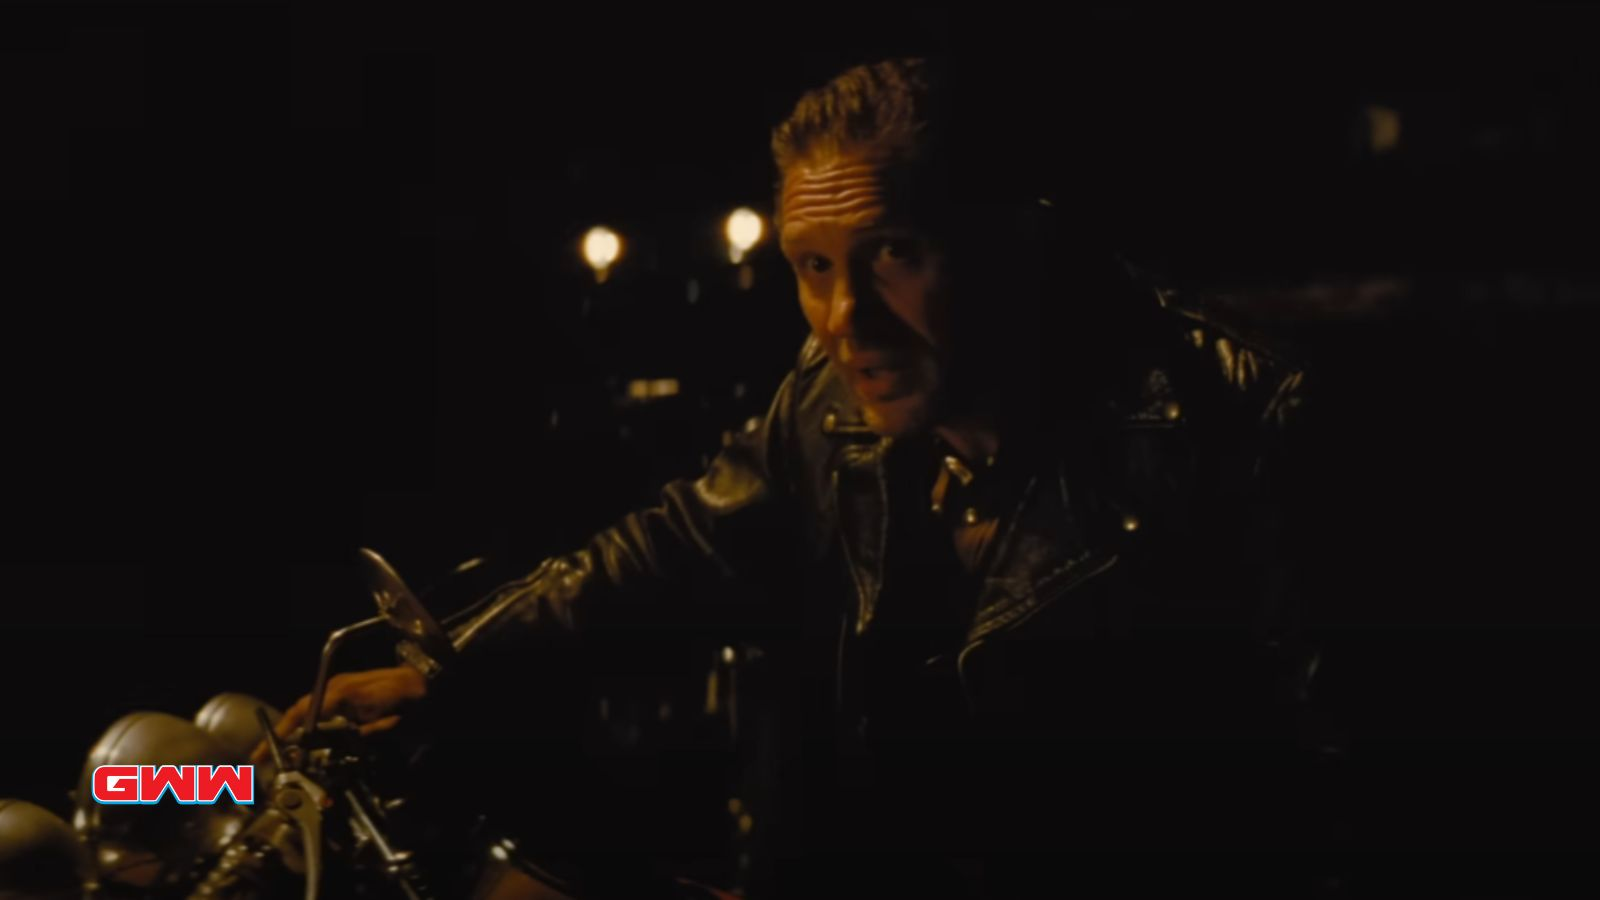 Johnny on a motorcycle at night, wearing a leather jacket, speaking.